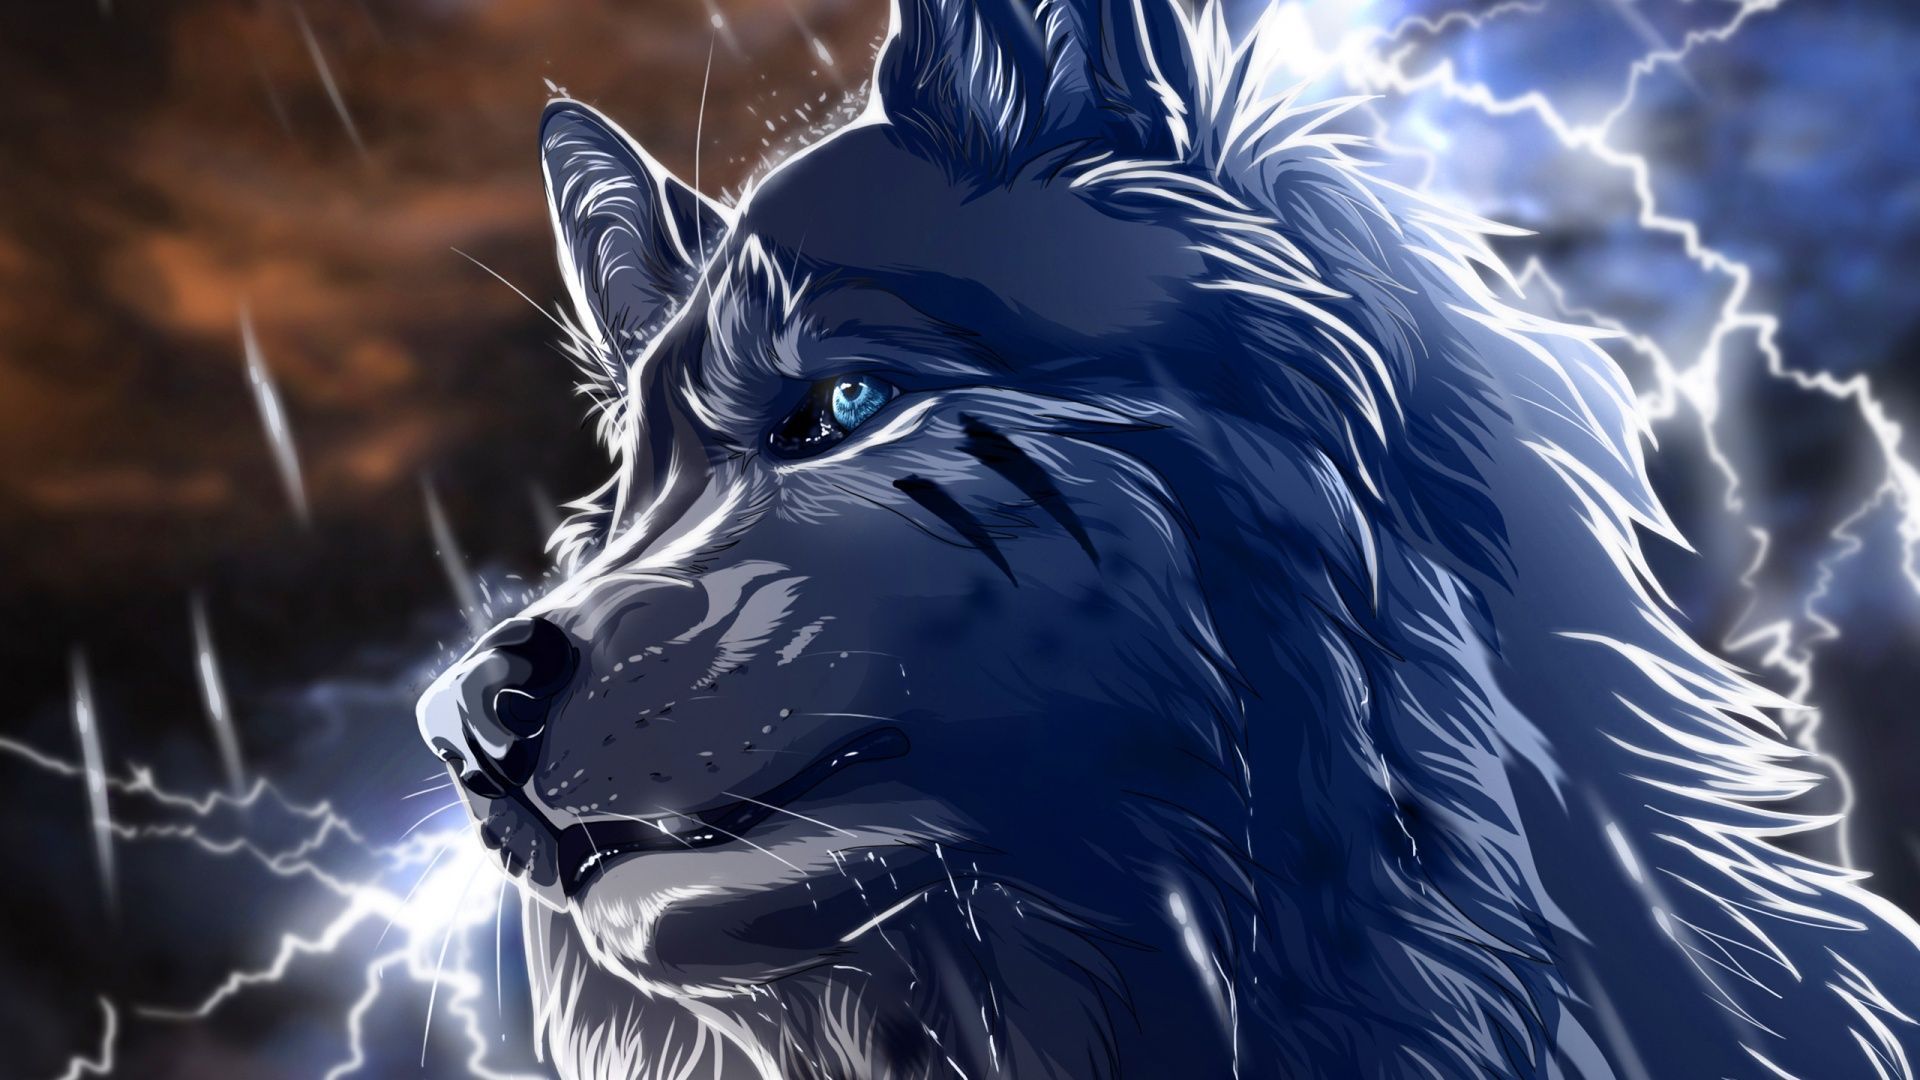 Desktop hd cool animated wolf images